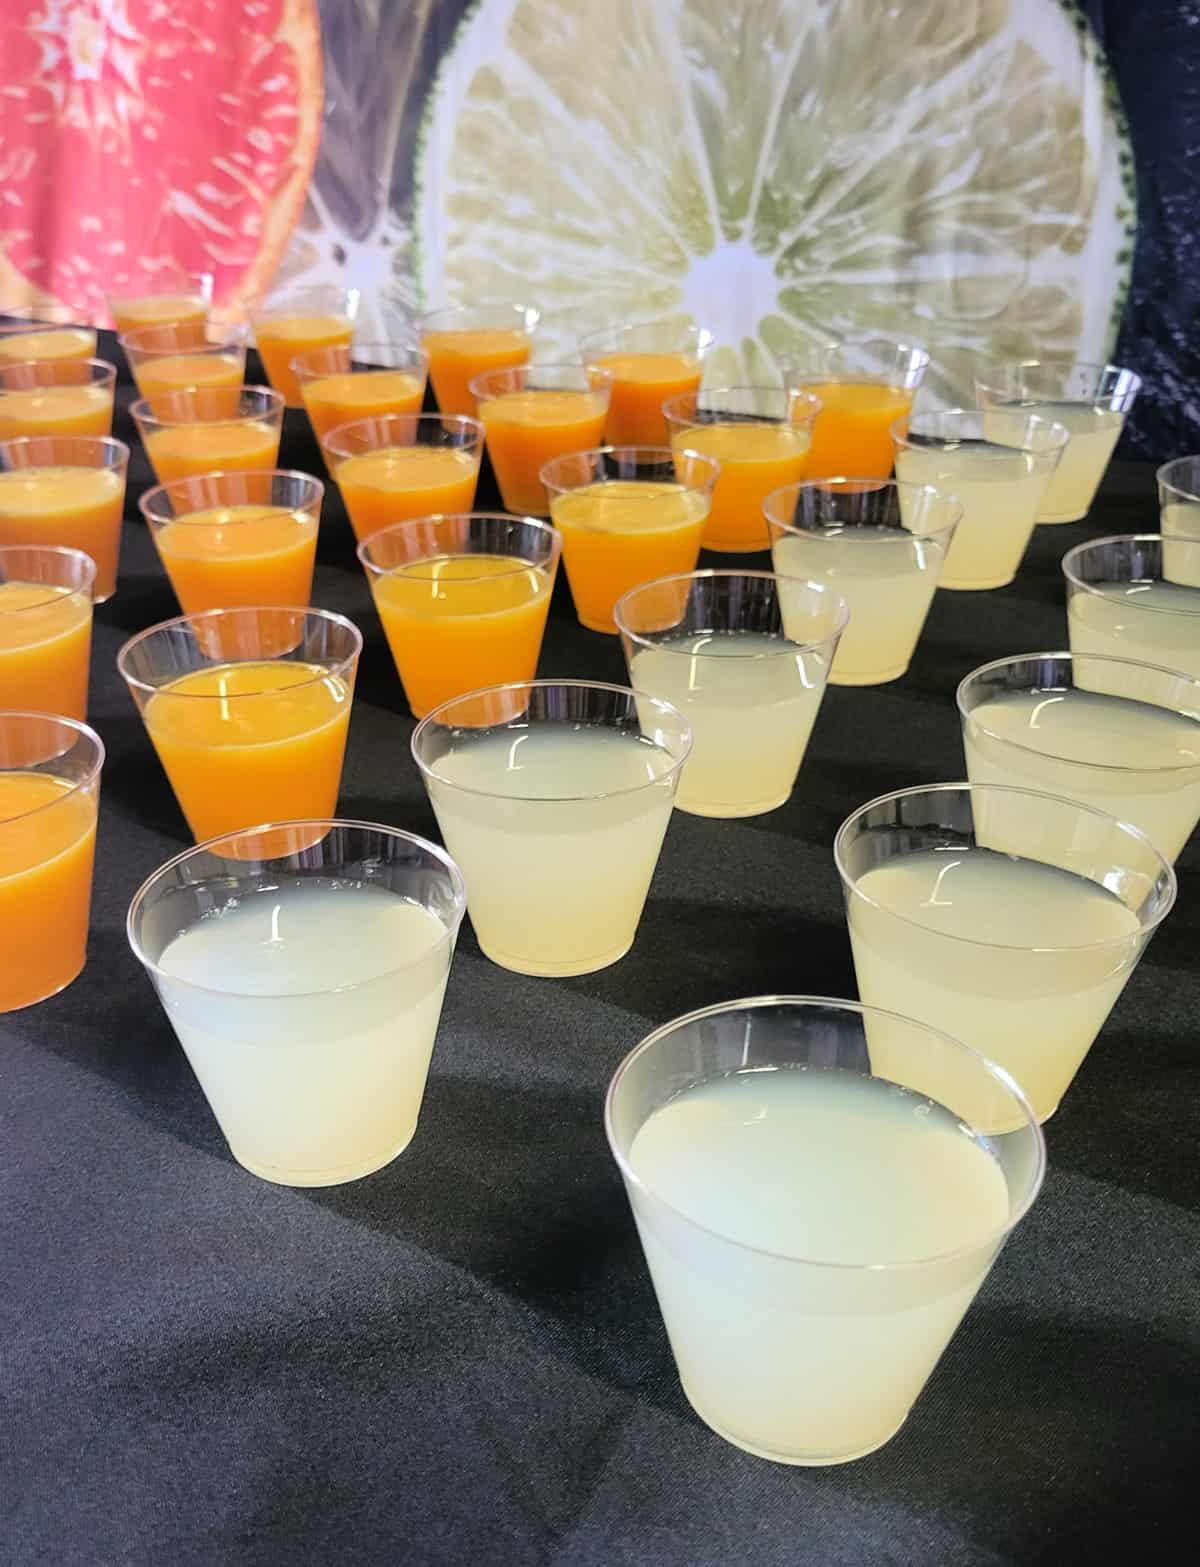 Sample cups of citrus juices on a table.